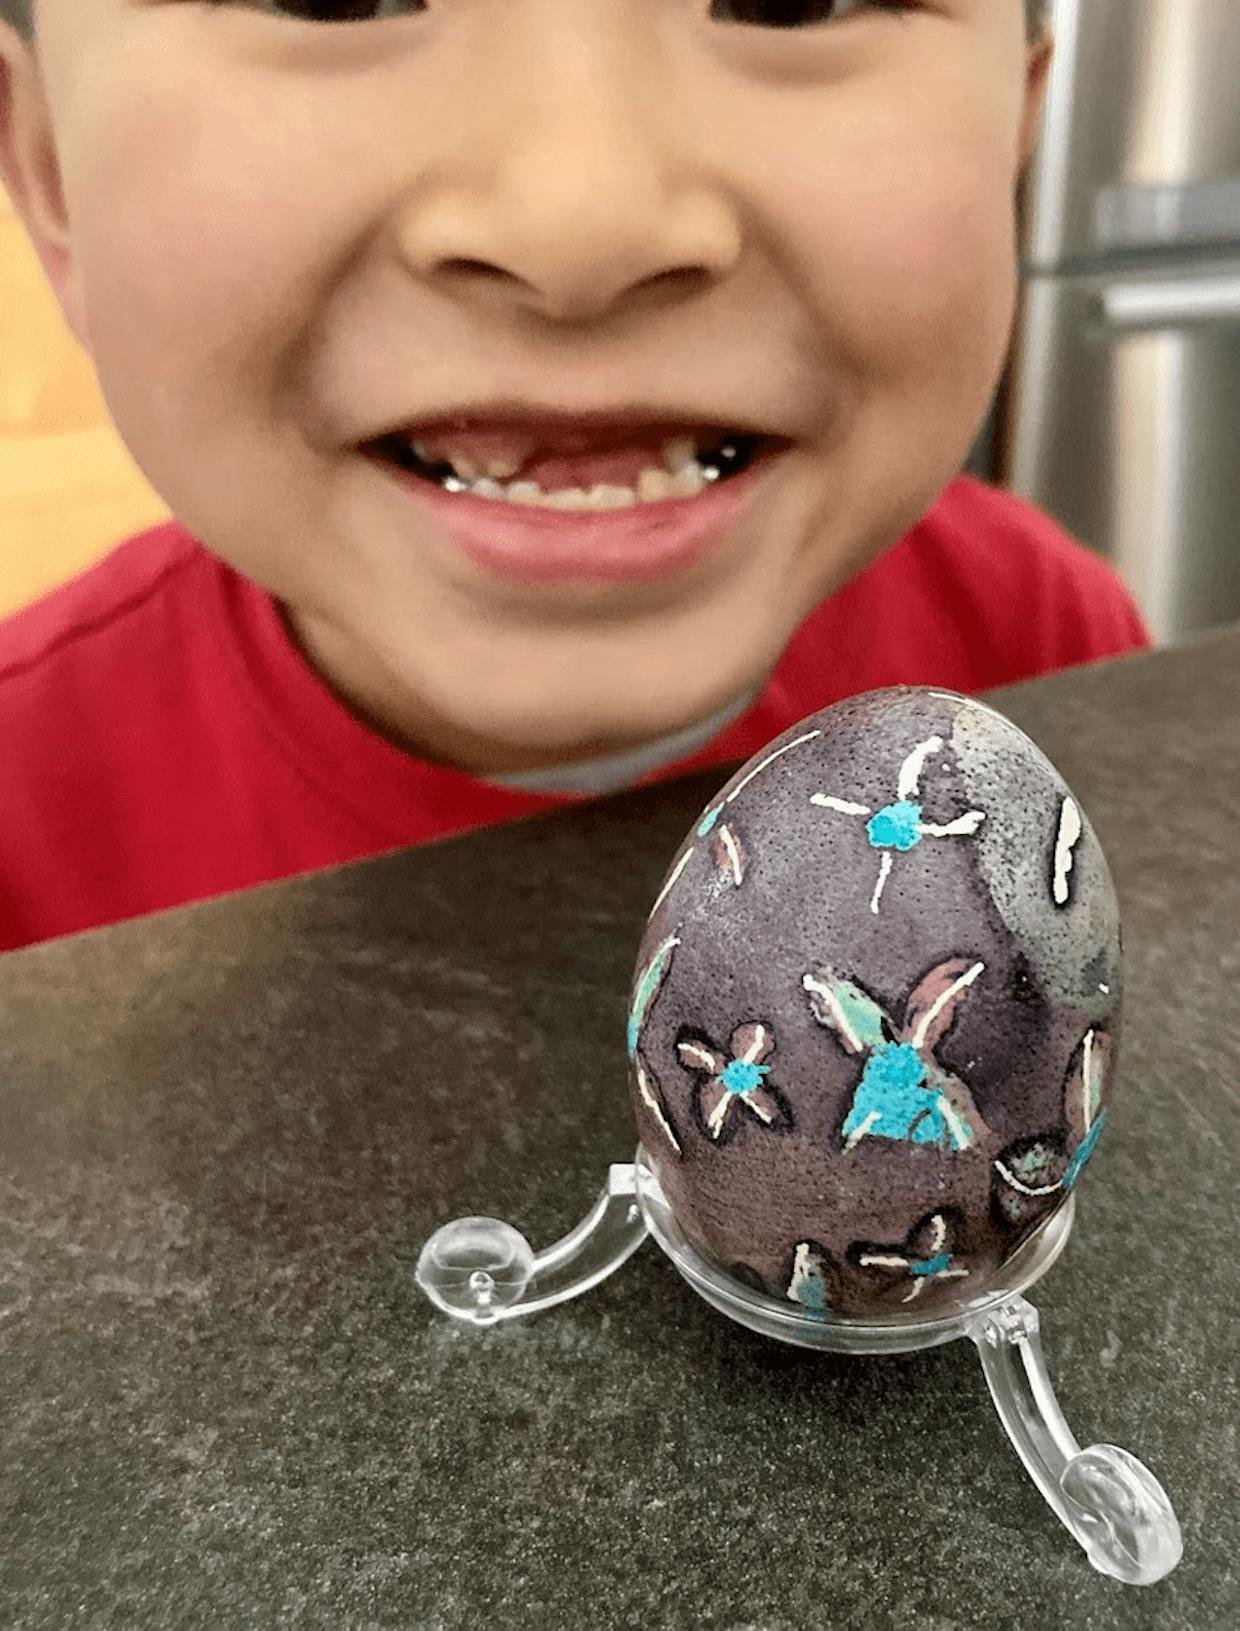 Elam, 7 years old, made his first attempt in painting and waxing a pysanky egg, hoping for love and peace in this world. 